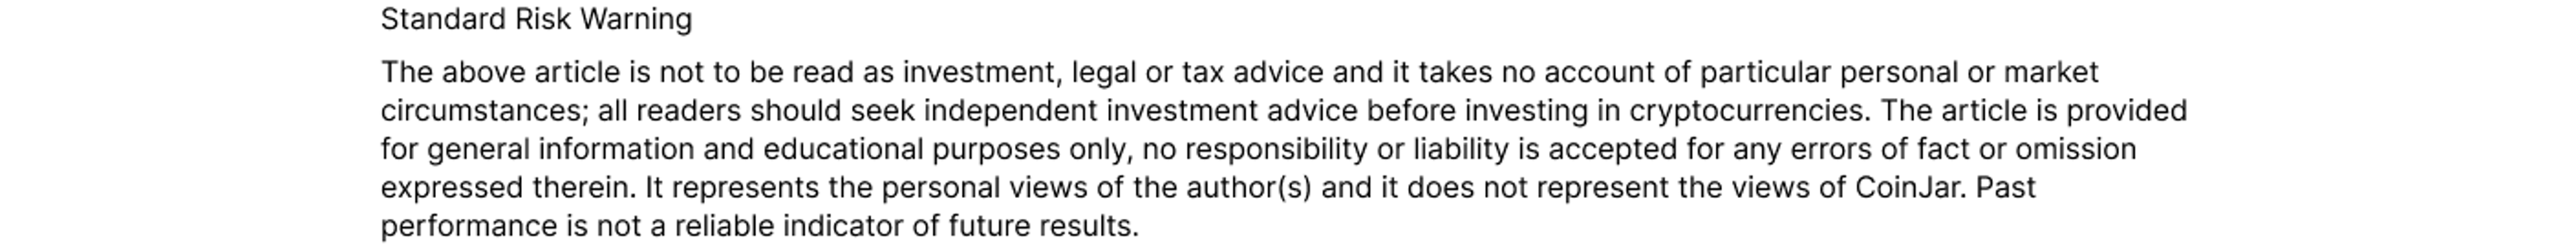 Standard Risk Warning  The above article is not to be read as investment, legal or tax advice and it takes no account of particular personal or market circumstances; all readers should seek independent investment advice before investing in cryptocurrencie